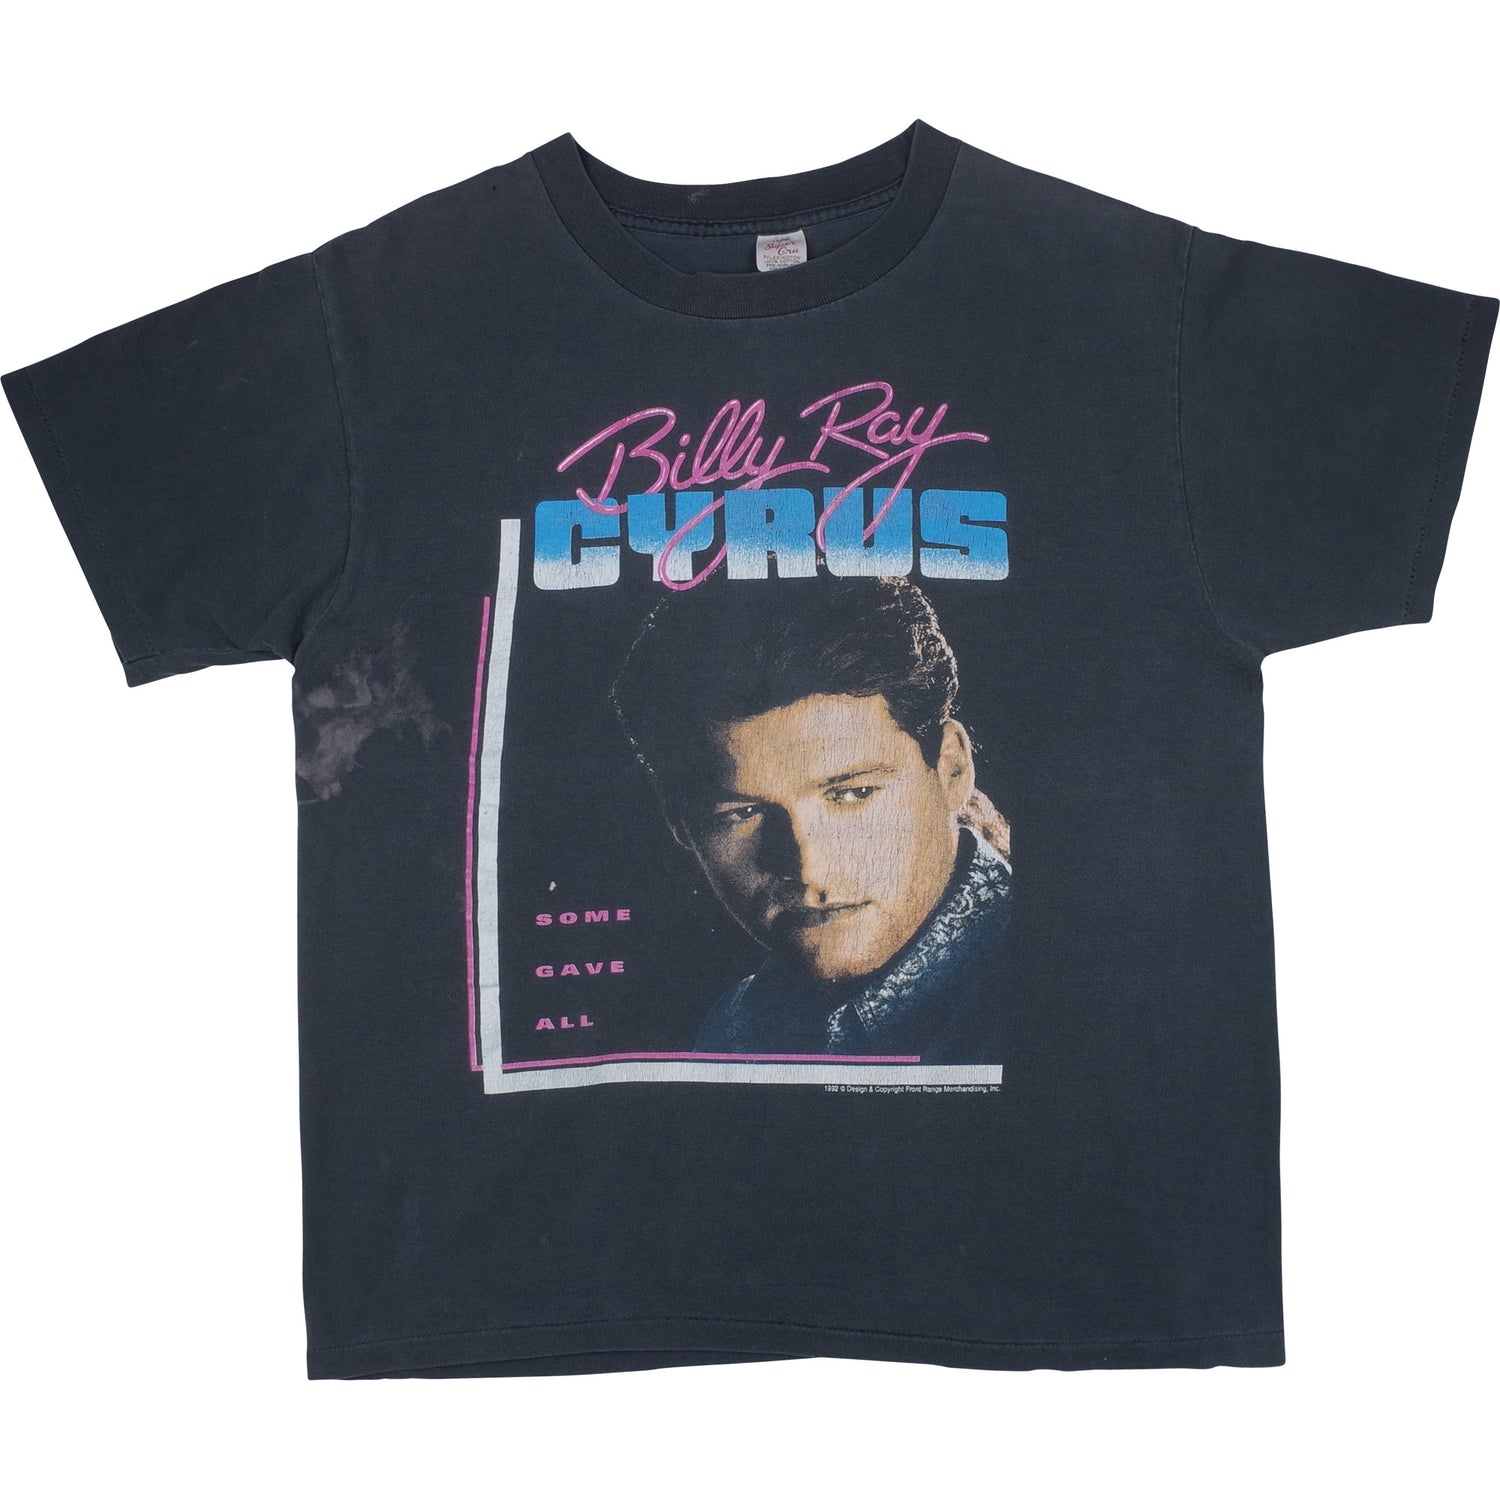 VINTAGE BILLY RAY CYRUS TEE